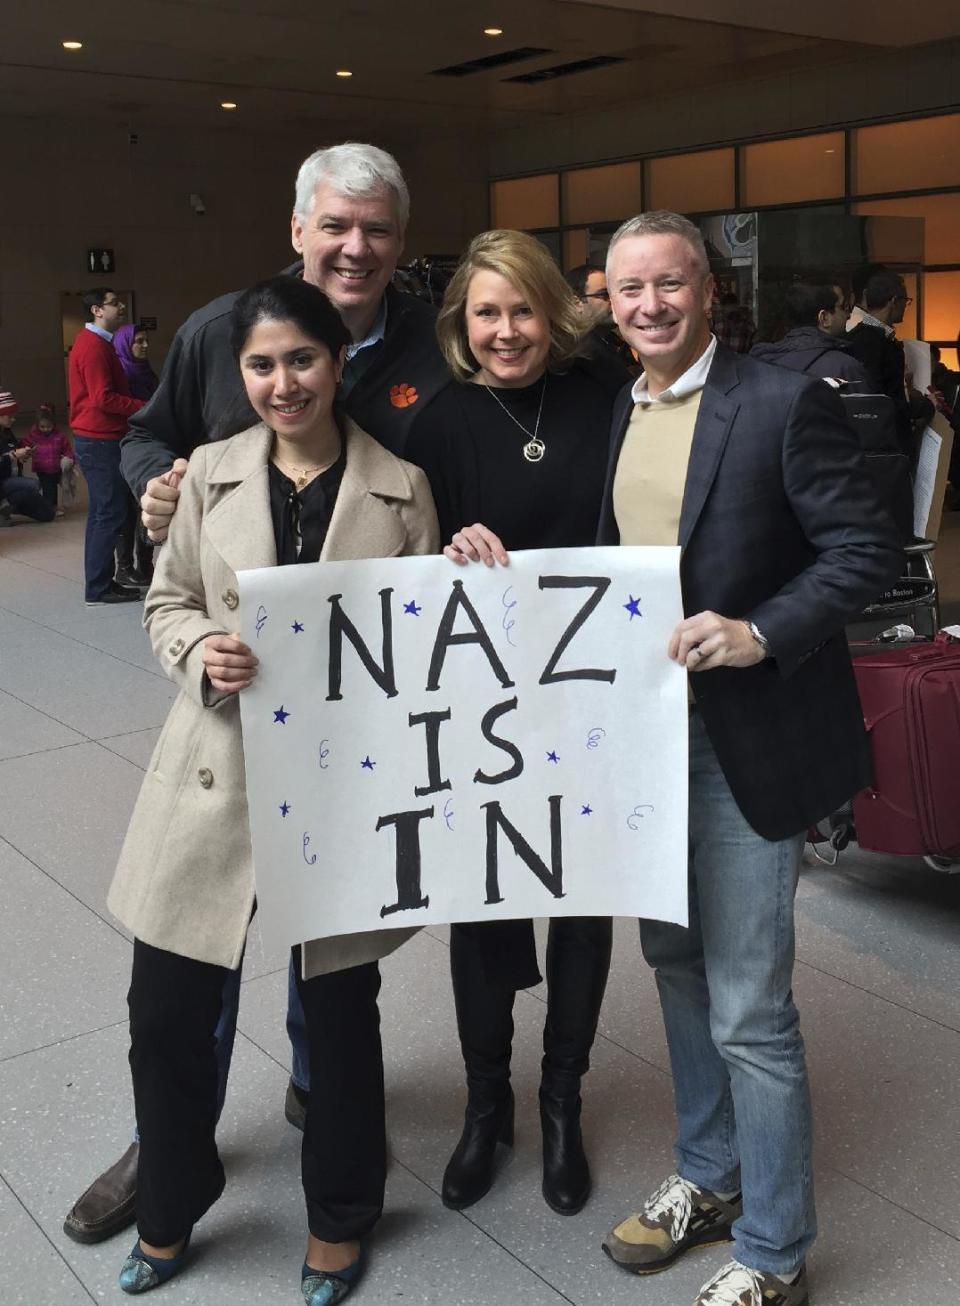 In this photo provided by Eric Martinez, Nazanin Zinouri, front left, and her colleagues from Modjoul, a startup technology firm in Clemson, S.C., pose for a photo after Zinouri arrived at Logan International Airport in Boston on Sunday, Feb. 5, 2017. Zinouri, an Iranian engineer who had been blocked from returning to South Carolina by President Donald Trump's travel ban against seven Muslim nations, returned to the U.S. on Sunday. Modjoul founder Martinez, from left, co-worker Jen Thorson and Rick Toller stand by Zinouri. (courtesy of Eric Martinez via AP)